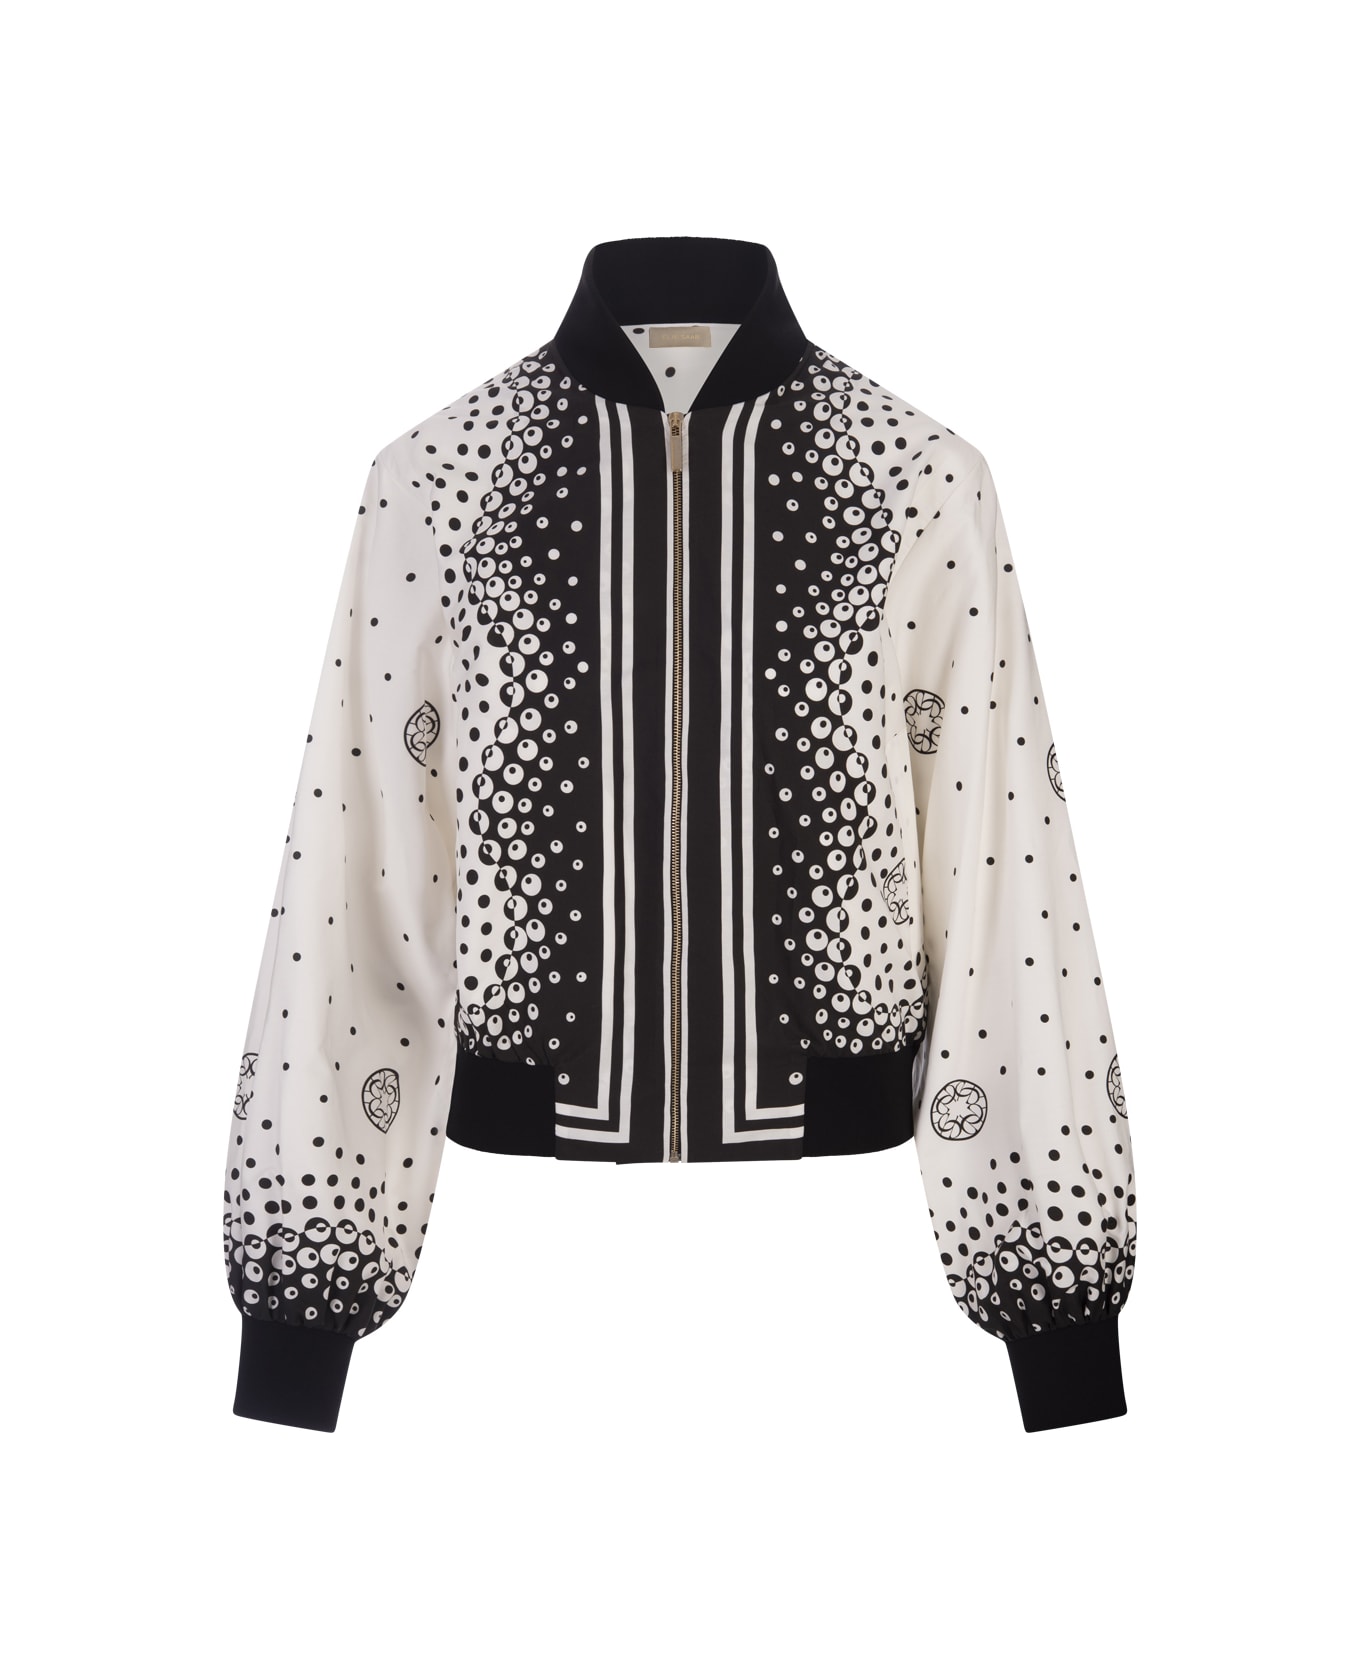 Elie Saab Moon Printed Cotton Bomber Jacket In White And Black - White